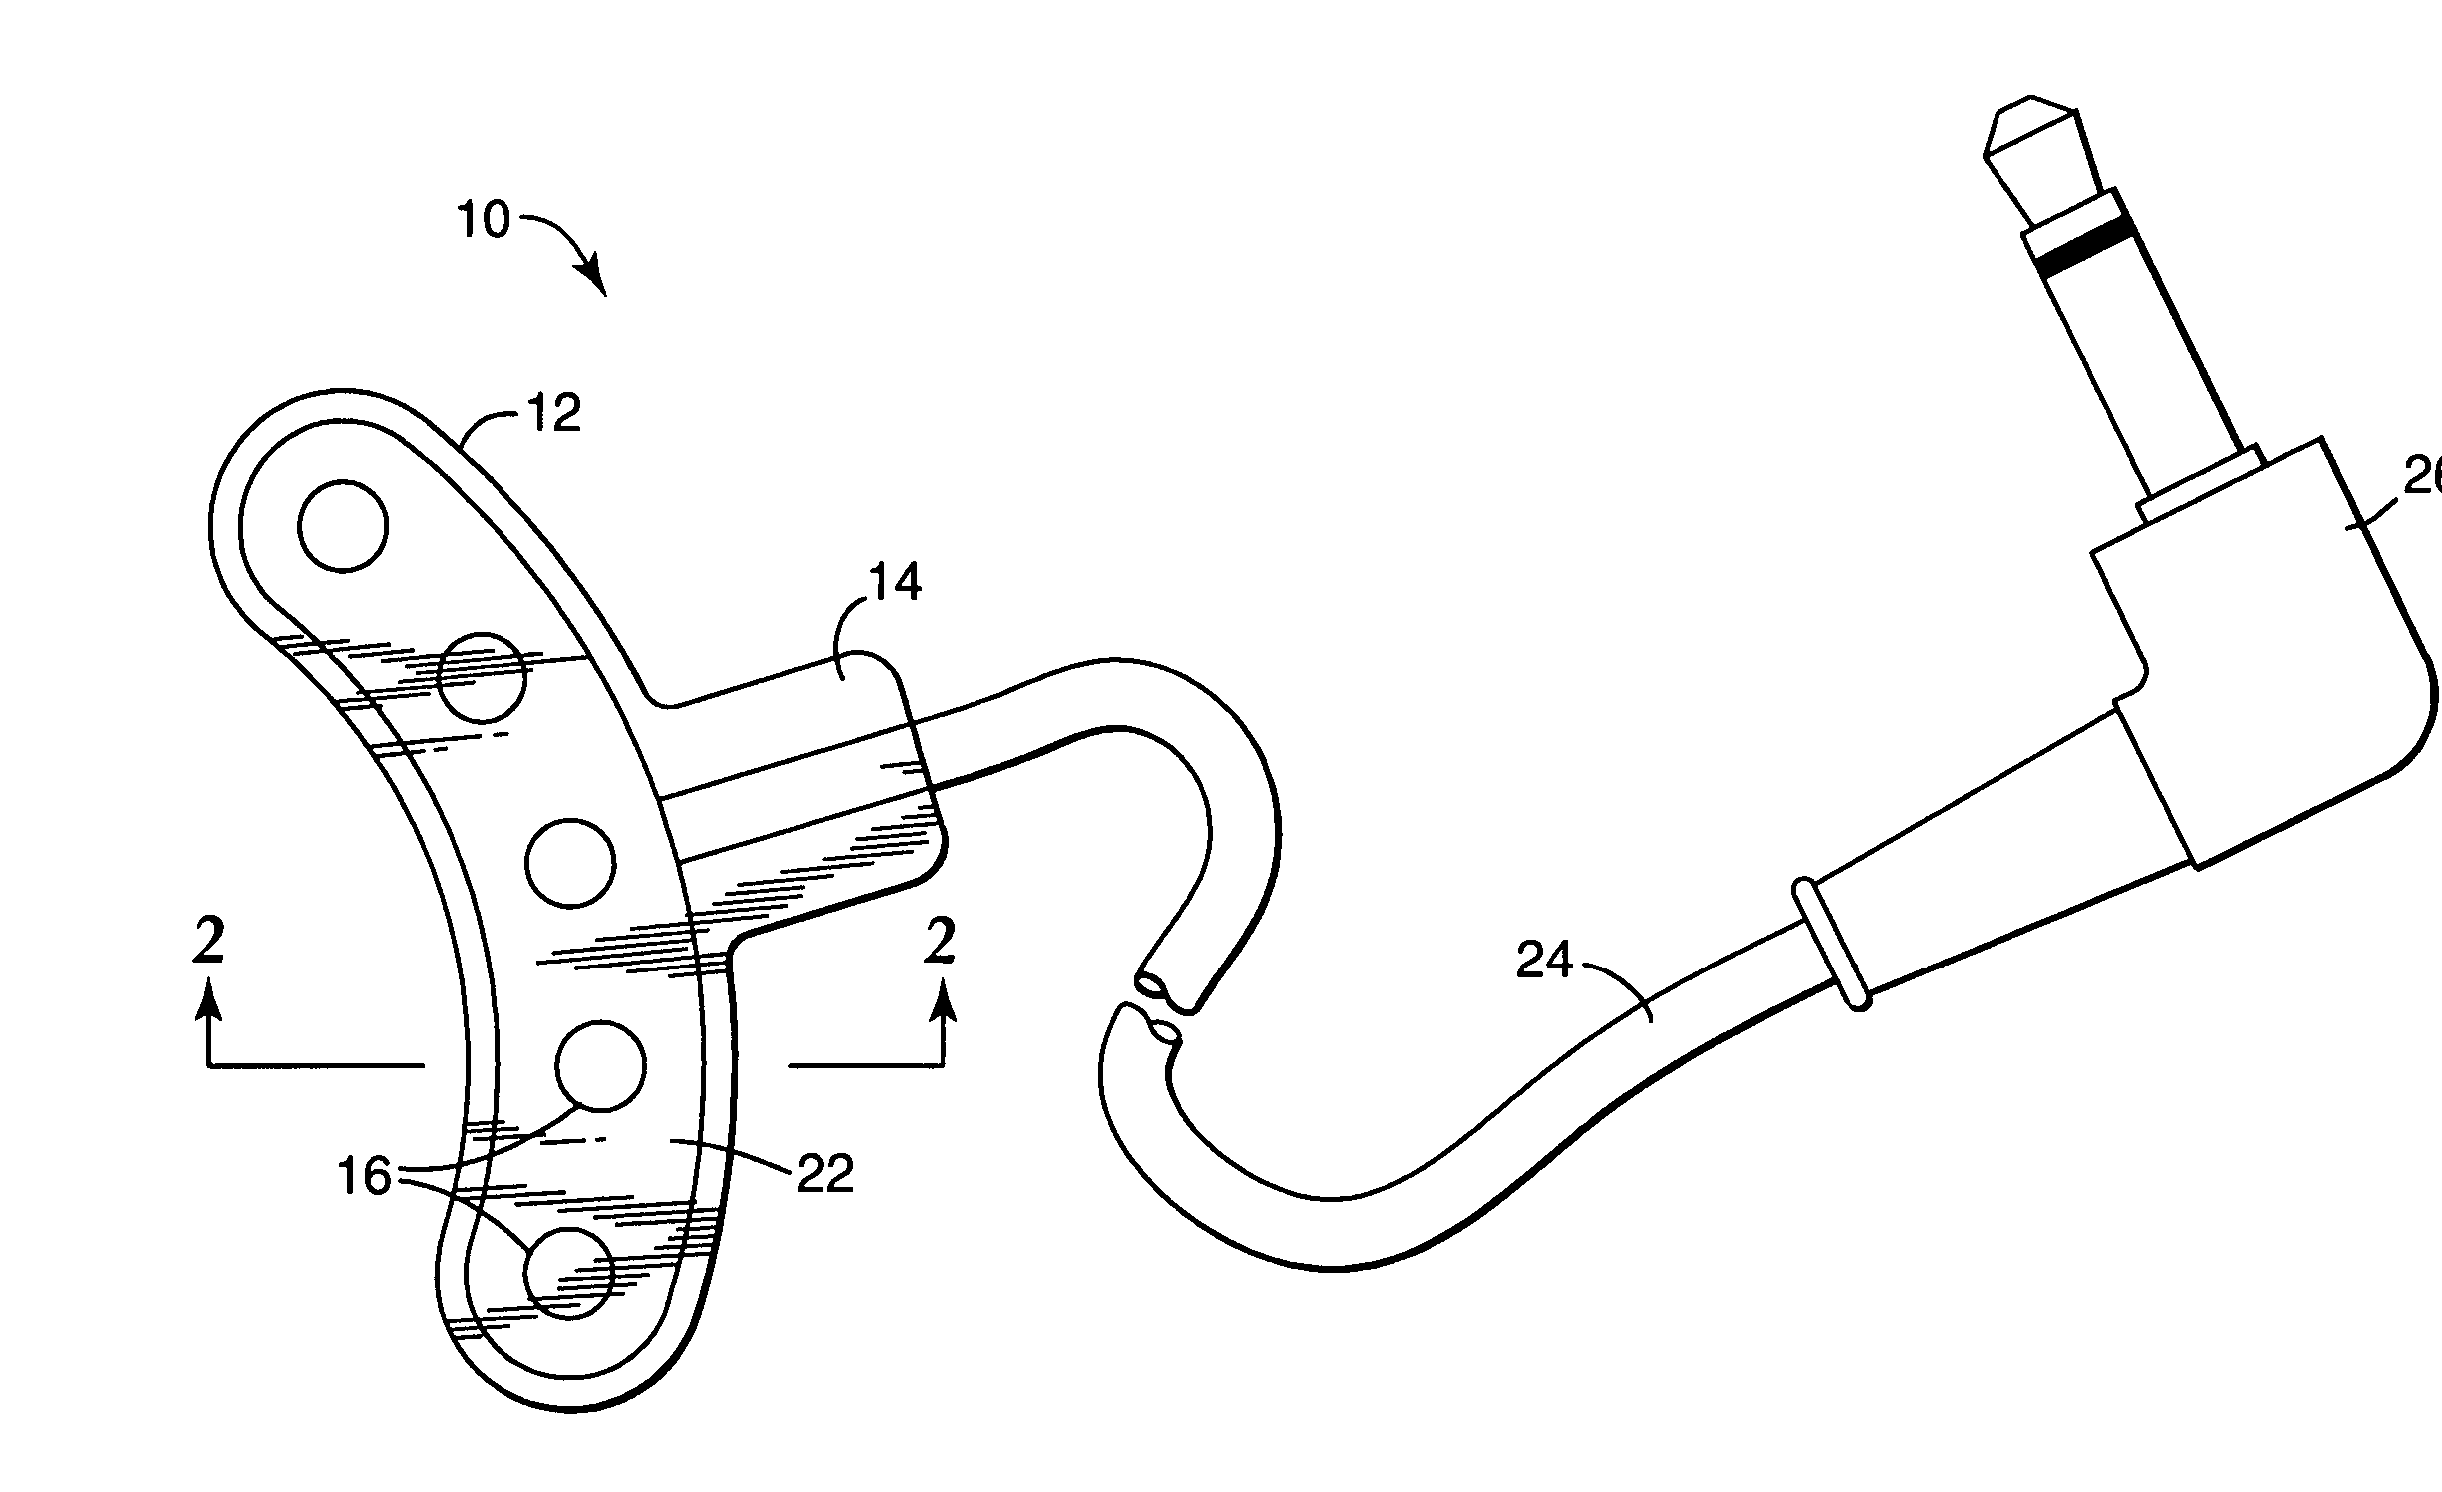 Method and apparatus for bonding orthodontic appliances to teeth